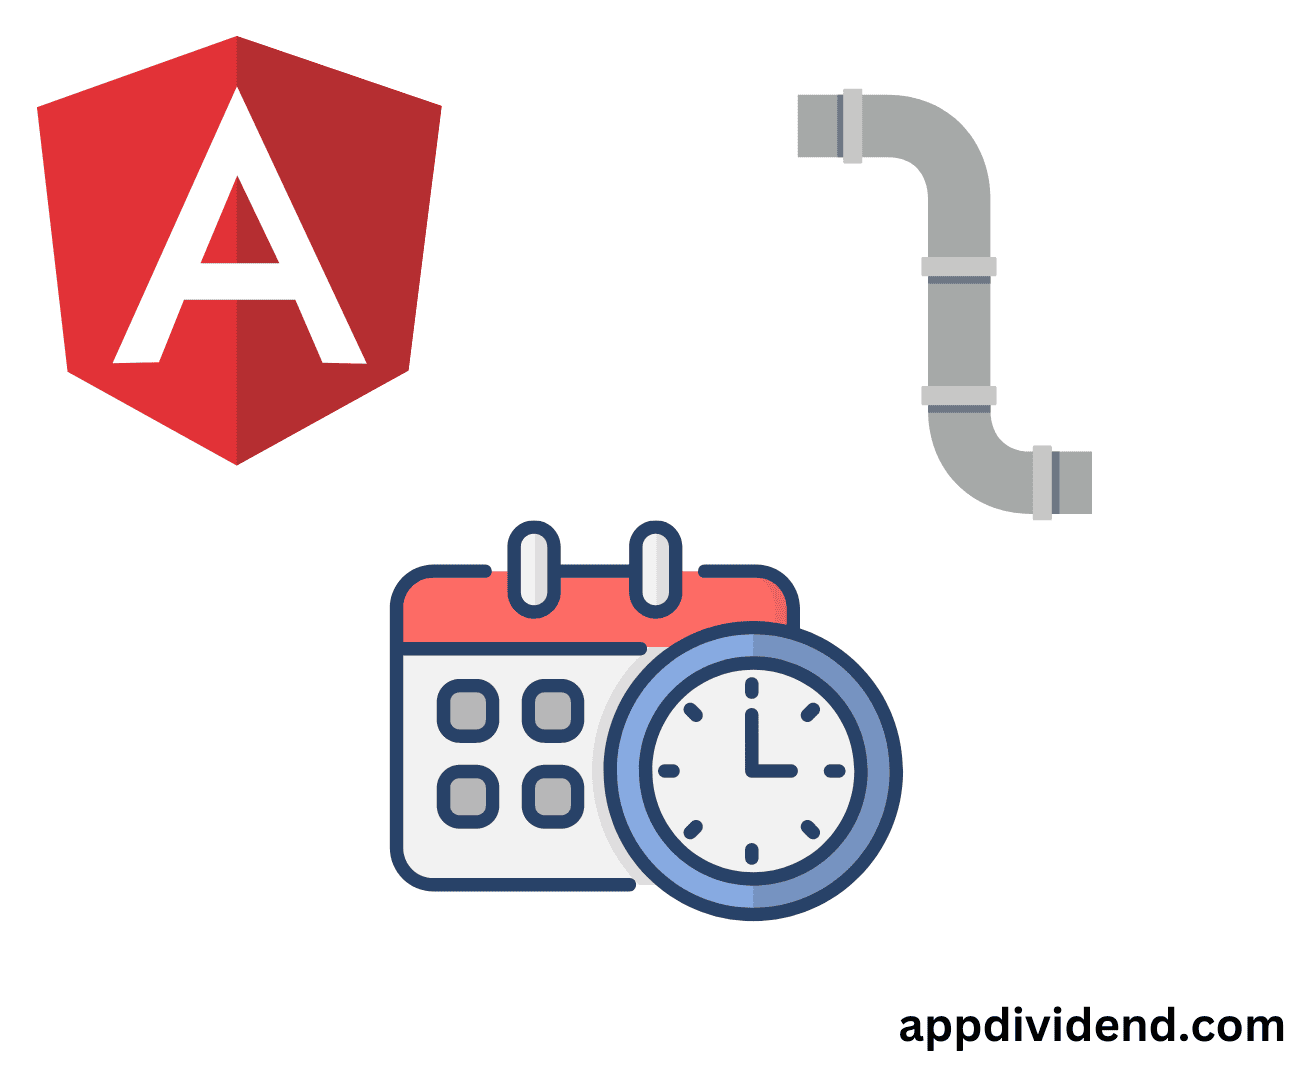 How to Format Dates with DatePipe in Angular